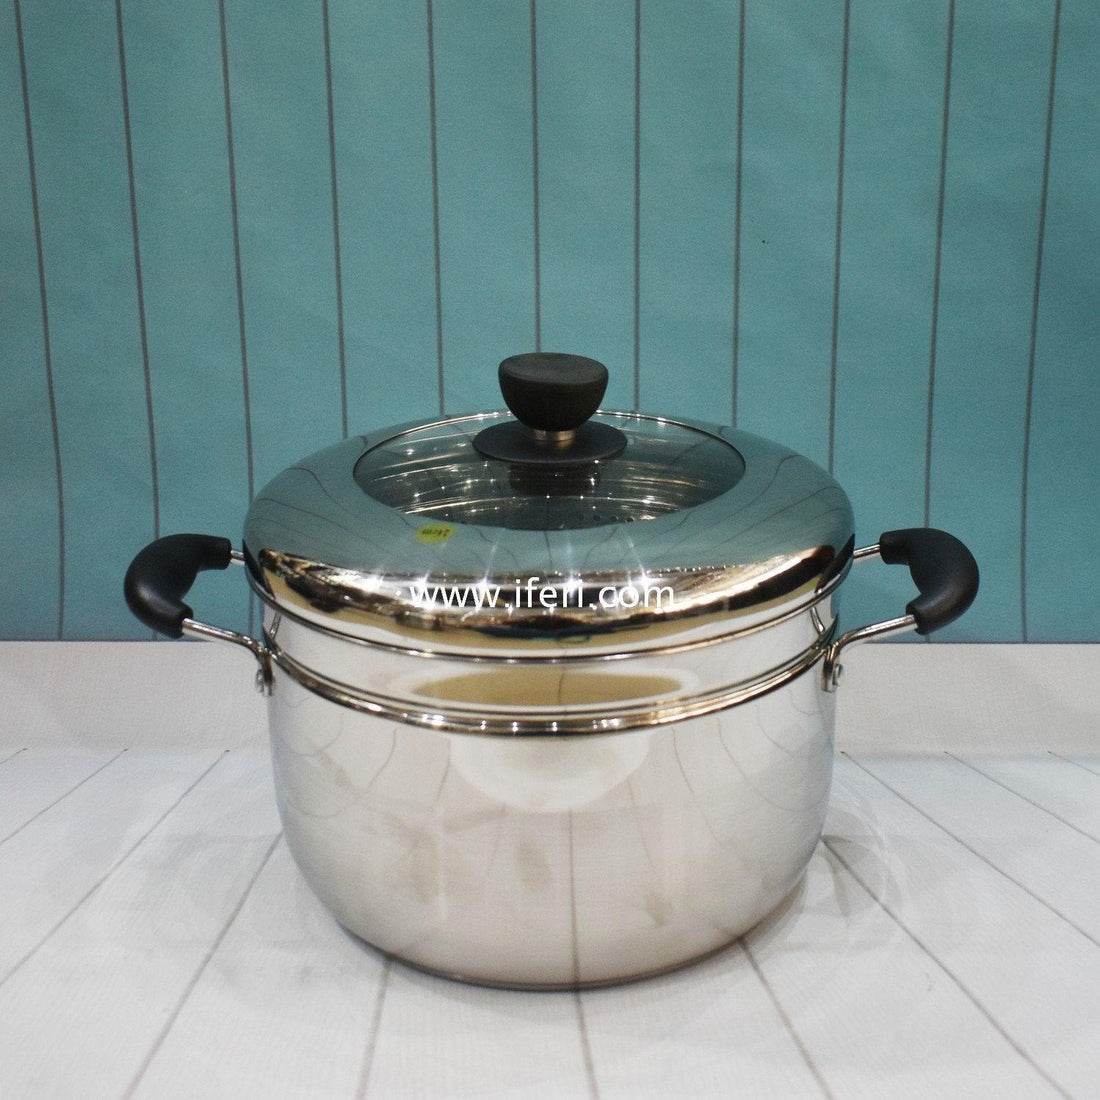 26 cm Stainless Steel Food Steamer with Lid RR5473-3 Price in Bangladesh - iferi.com